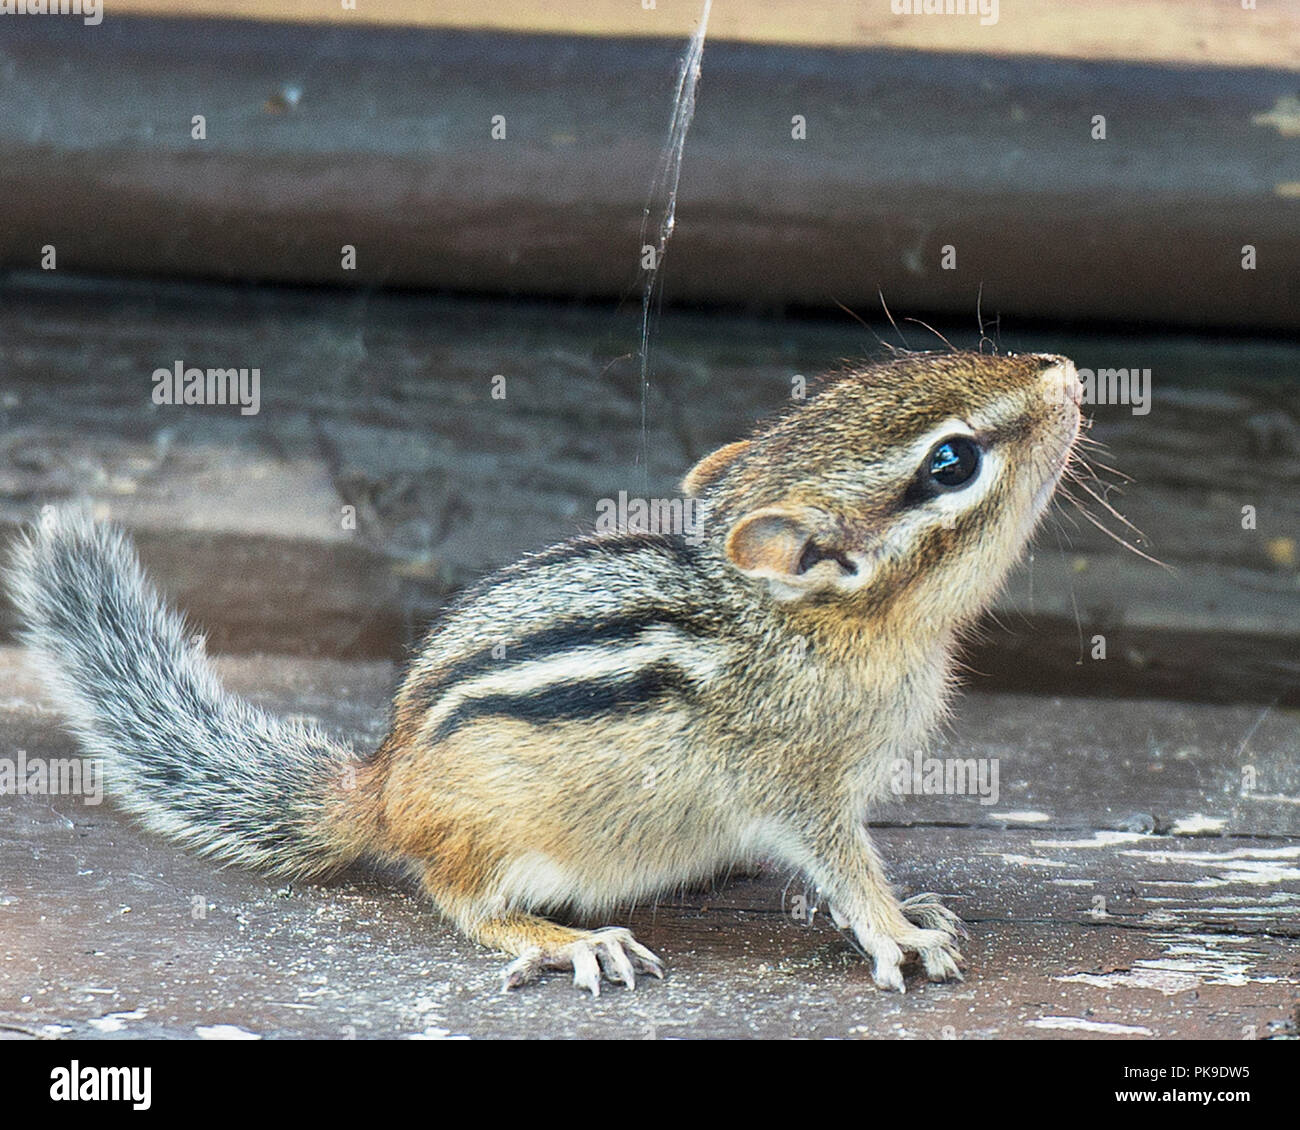 Chipmunk animal babies in their environment and surrounding exposing their brown fun and head. Stock Photo